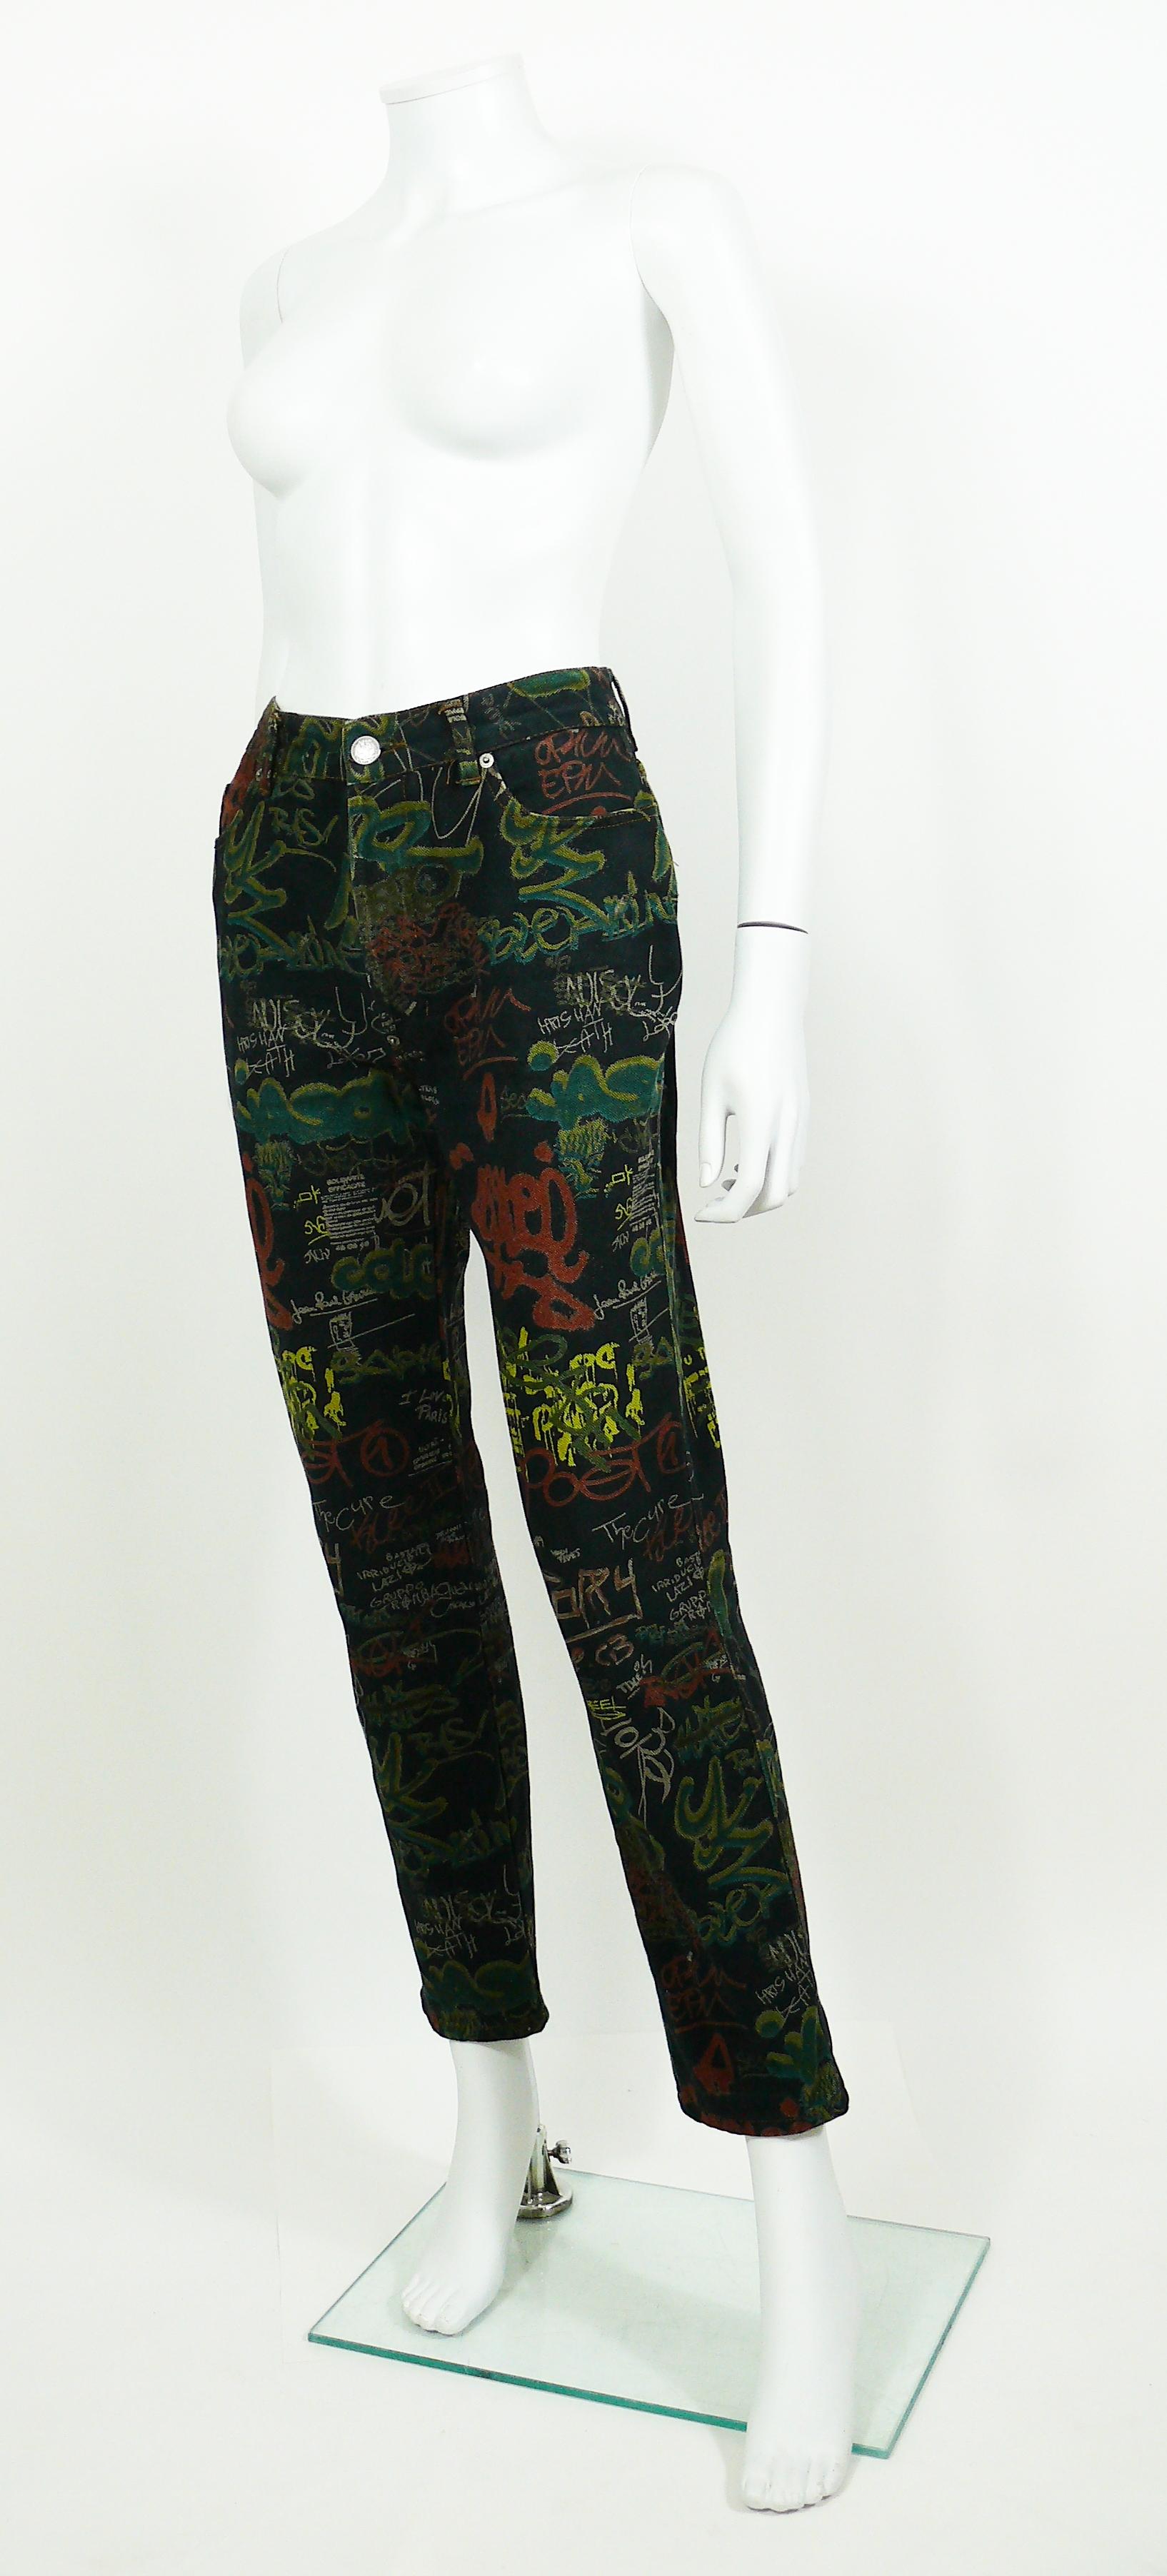 JEAN PAUL GAULTIER vintage denim pants trousers featuring an opulent multicolored graffitis print on a black background.

These trousers feature :
- Front buttoning.
- Front and back pockets.
- Belt loops and signature brand loop at the back.

Label